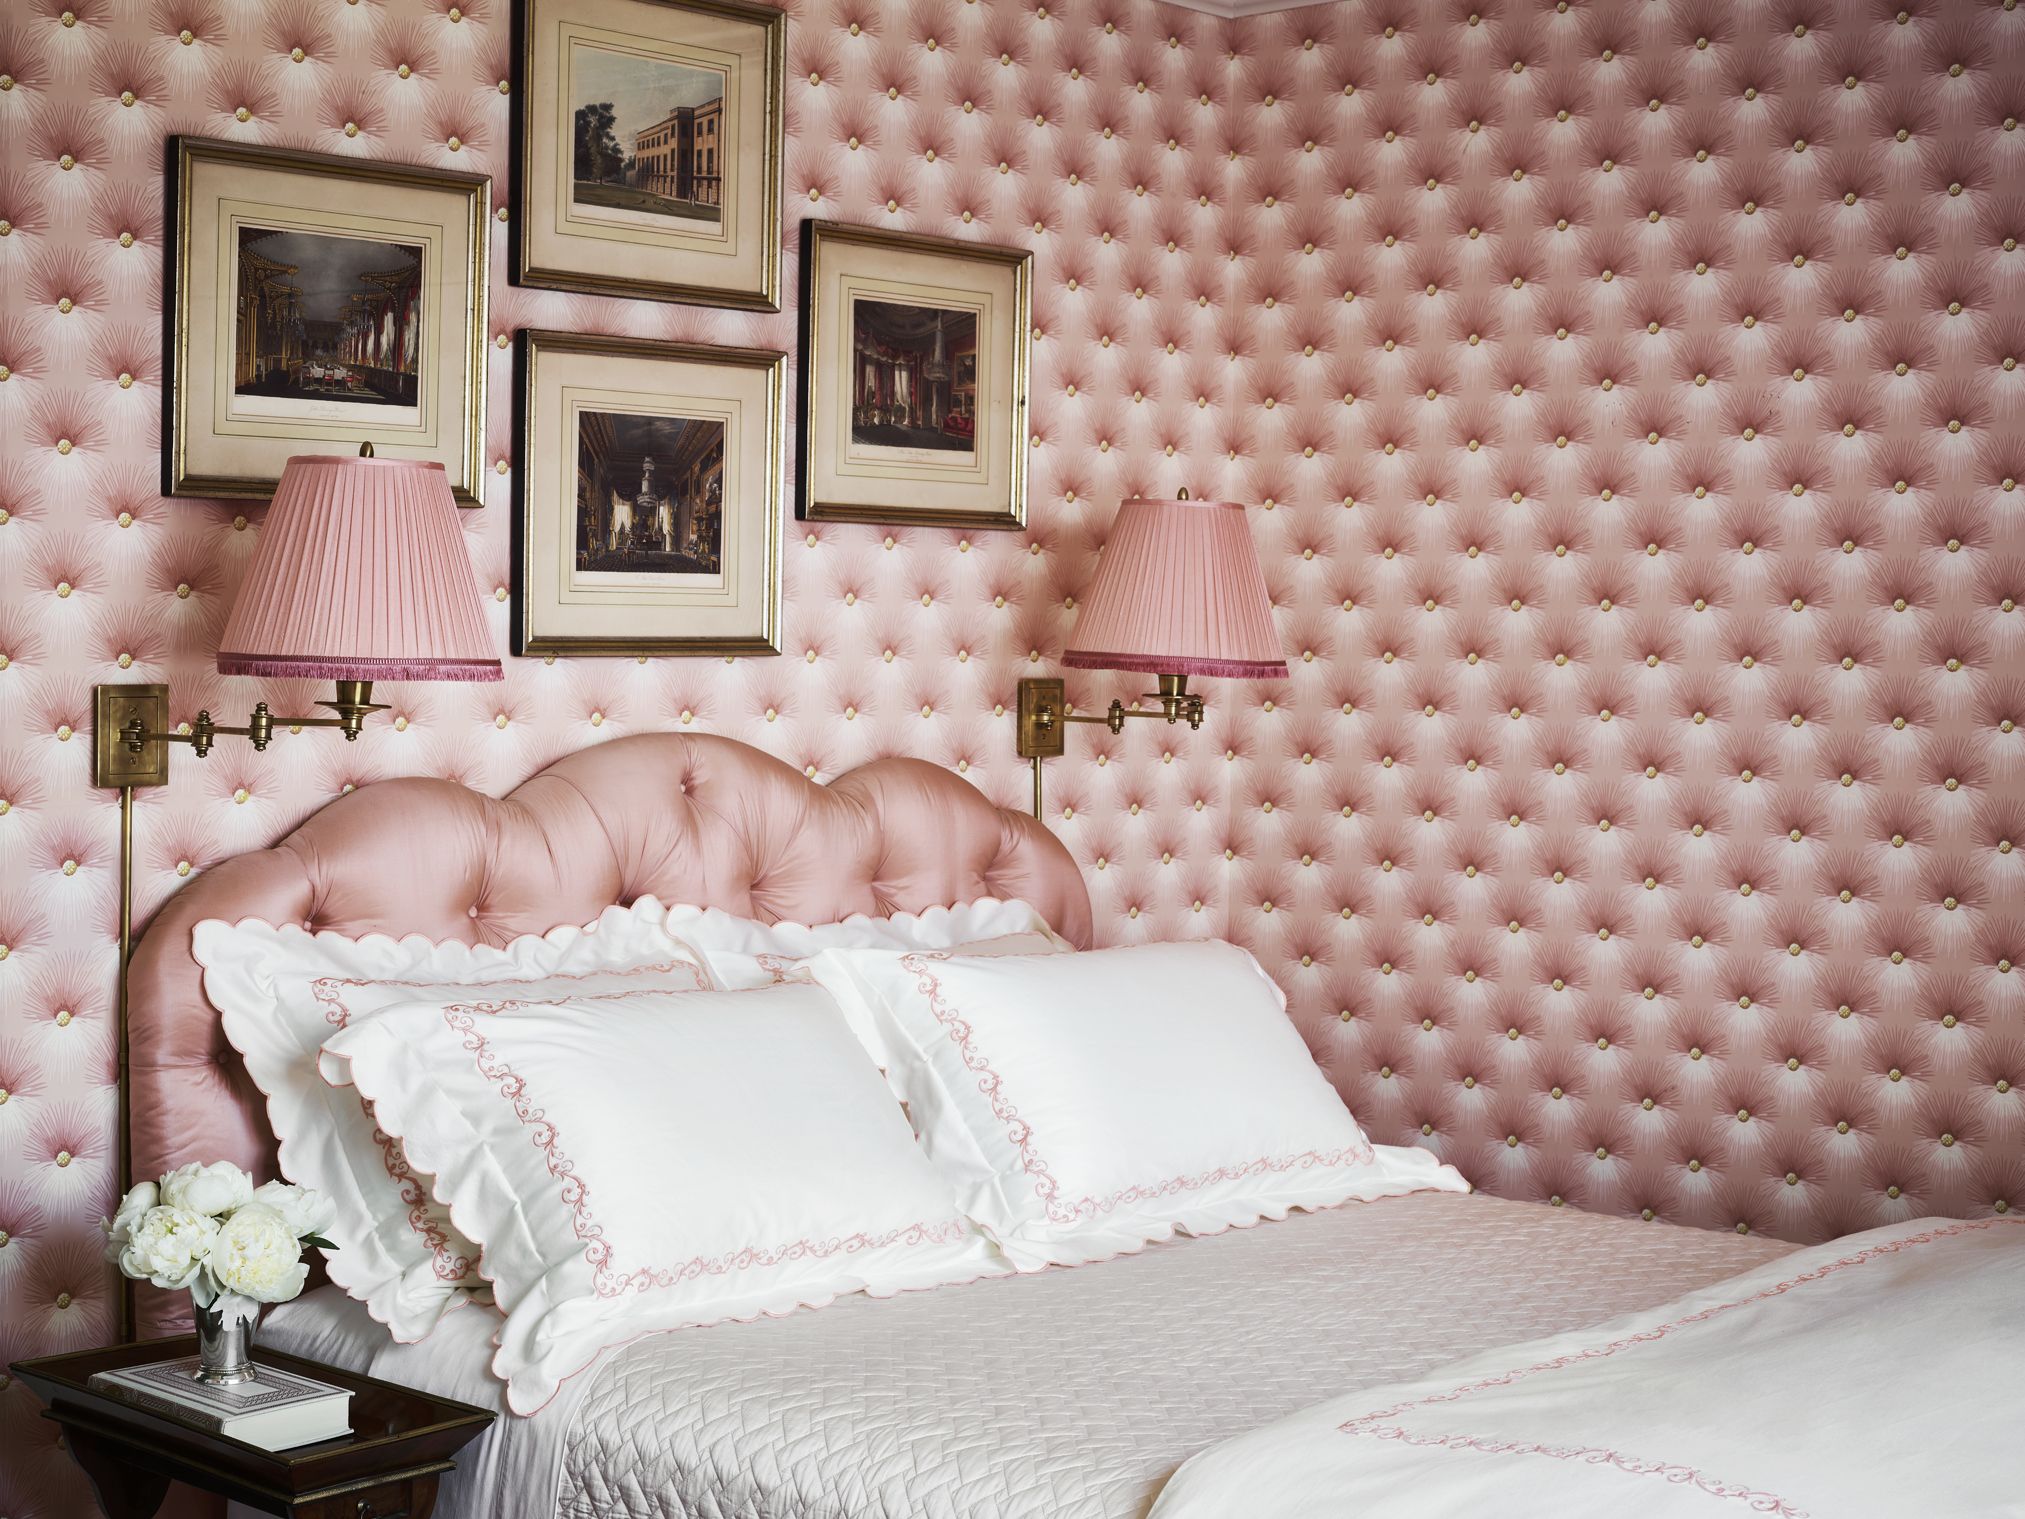 a pink upholstered headboard and white bedding against a pink and white patterned wallpaper